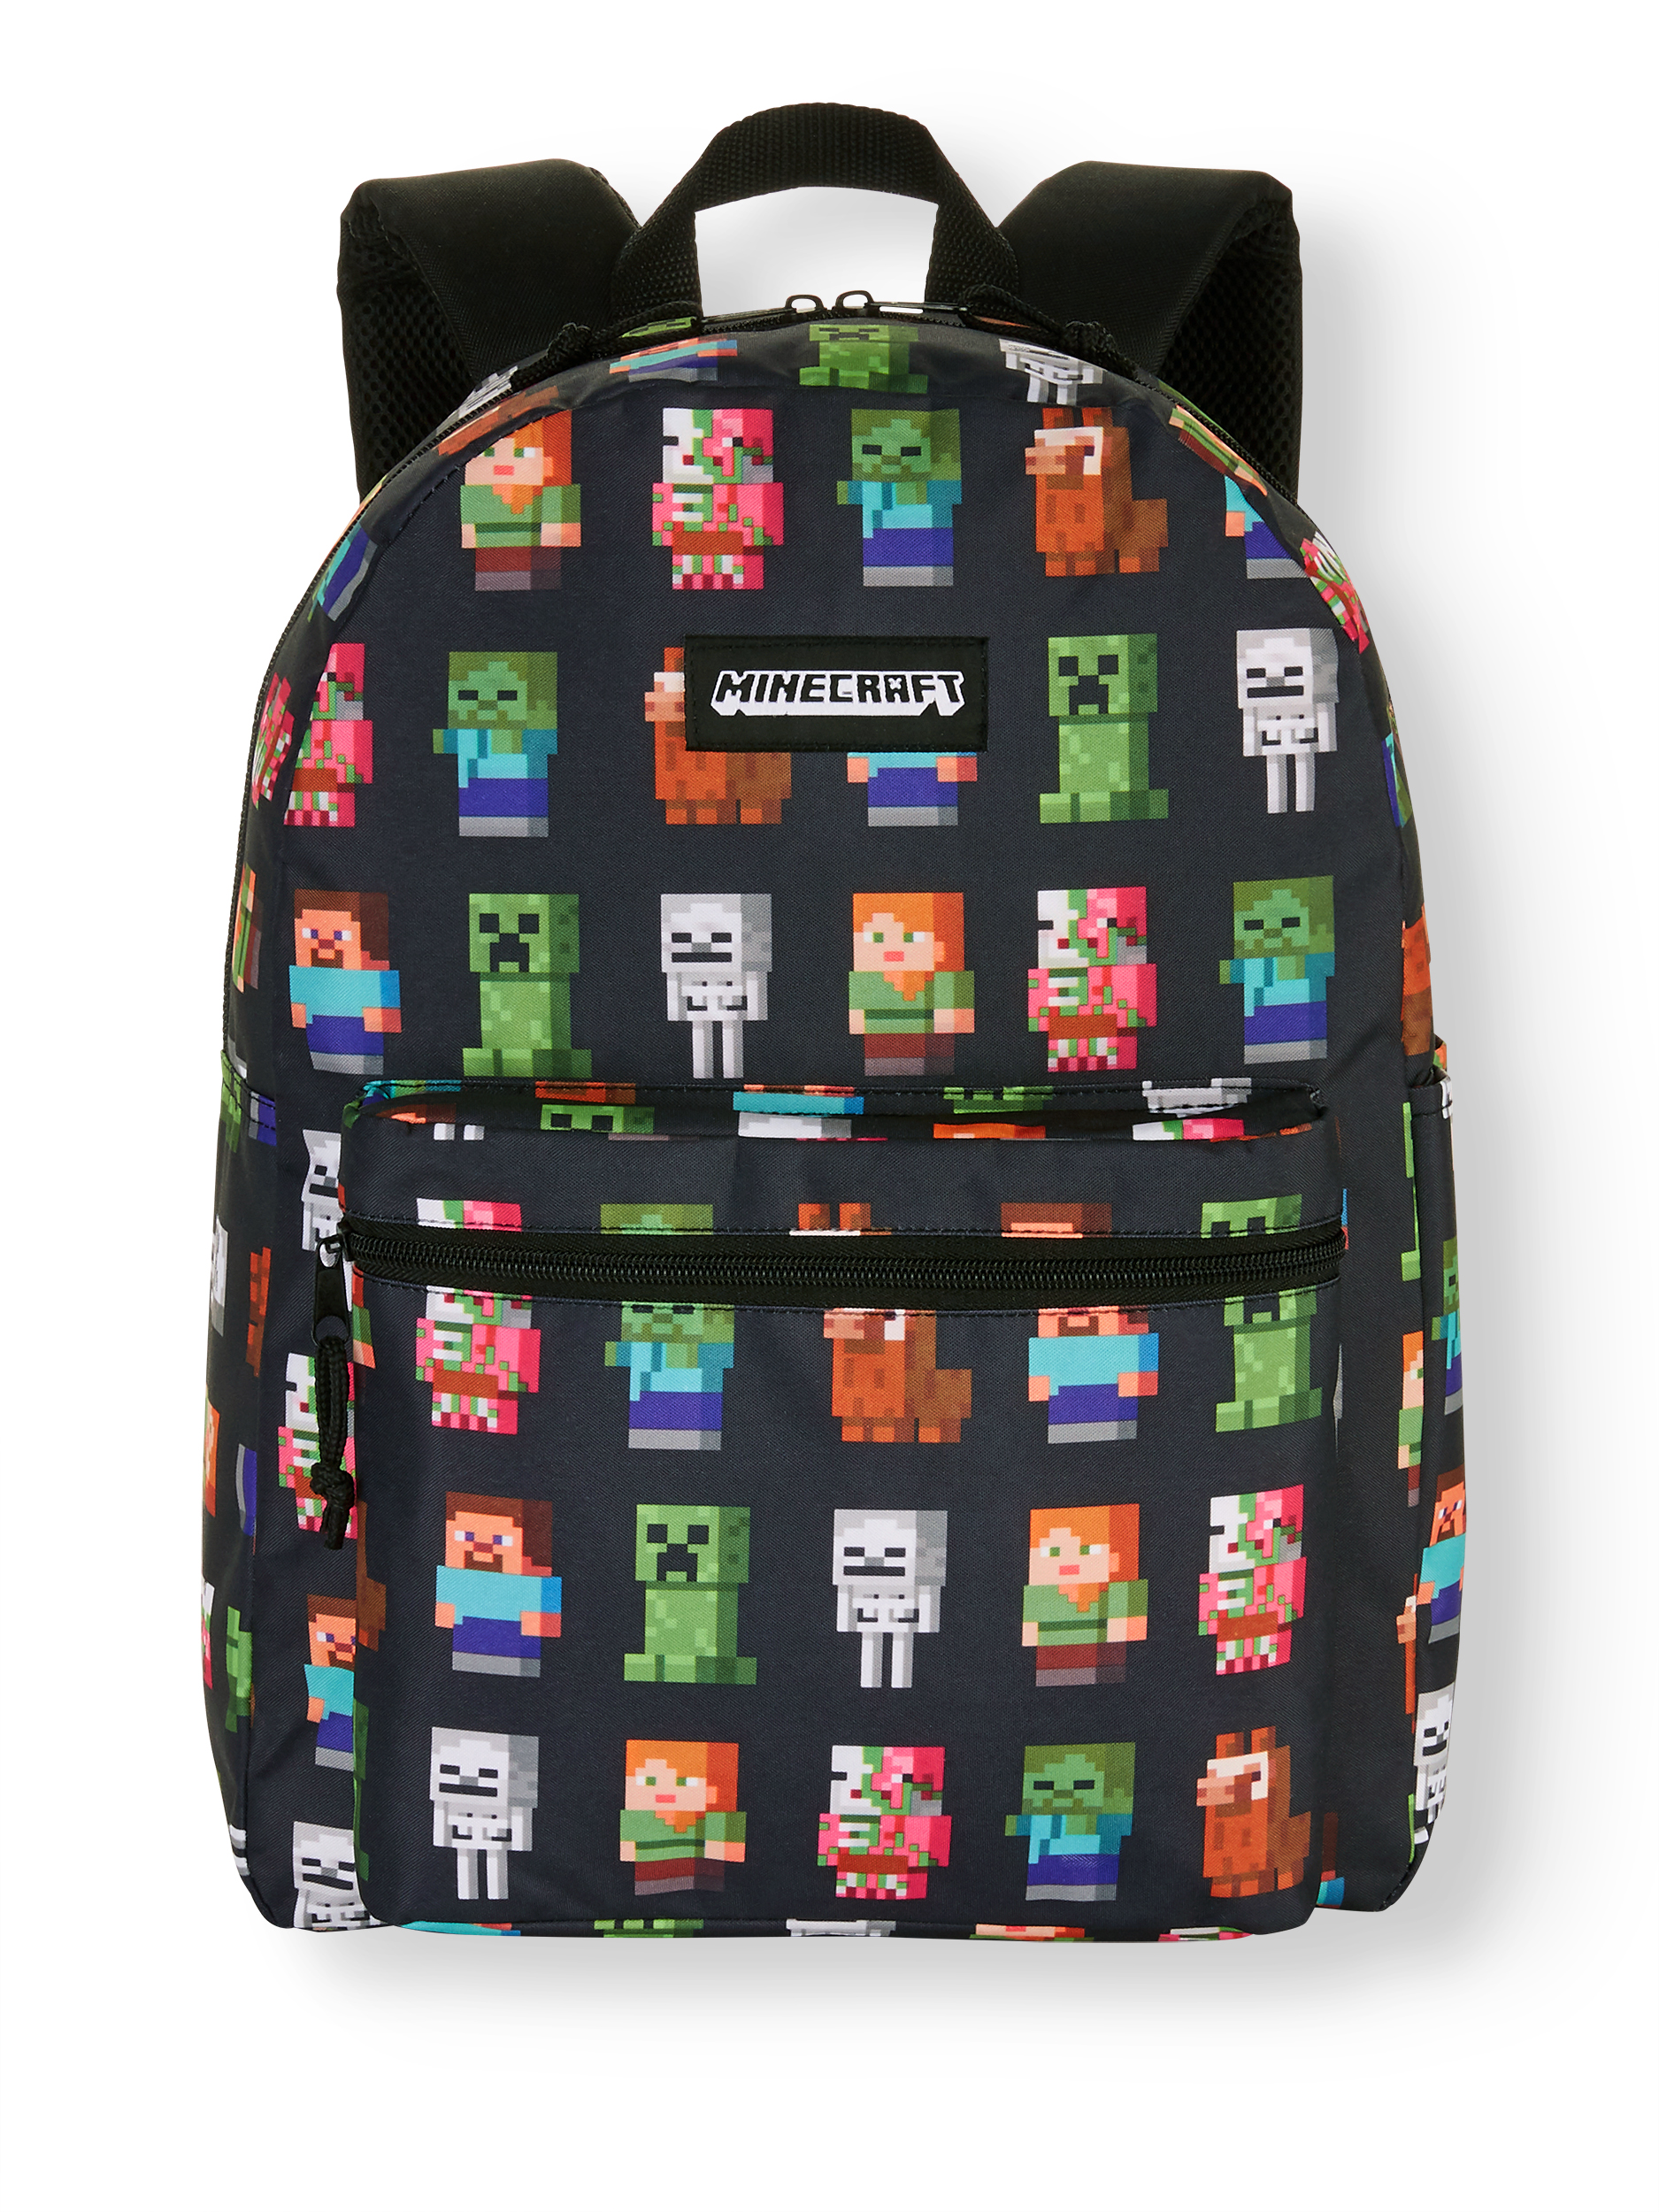 Minecraft Characters 16" Backpack - image 1 of 4